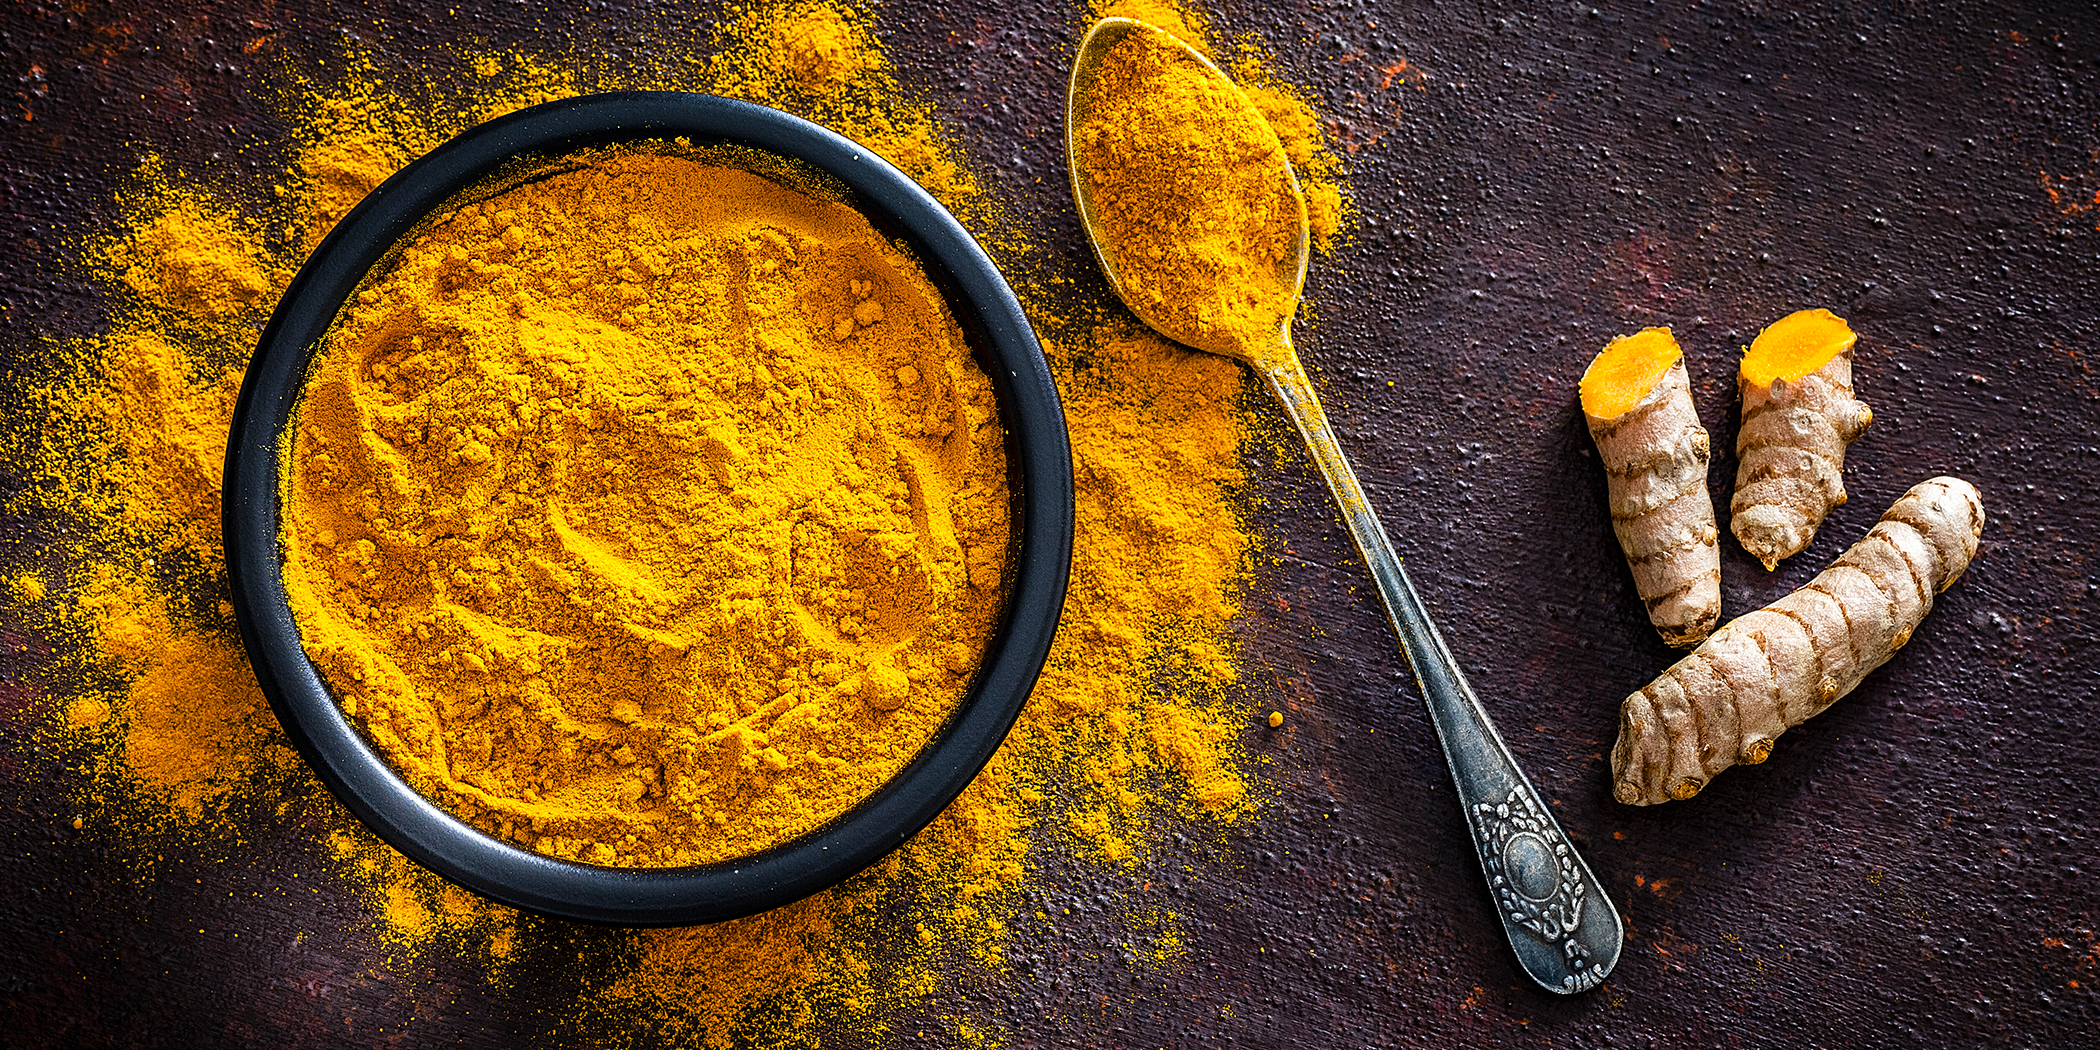 Are Turmeric and Curcumin the Same Thing?